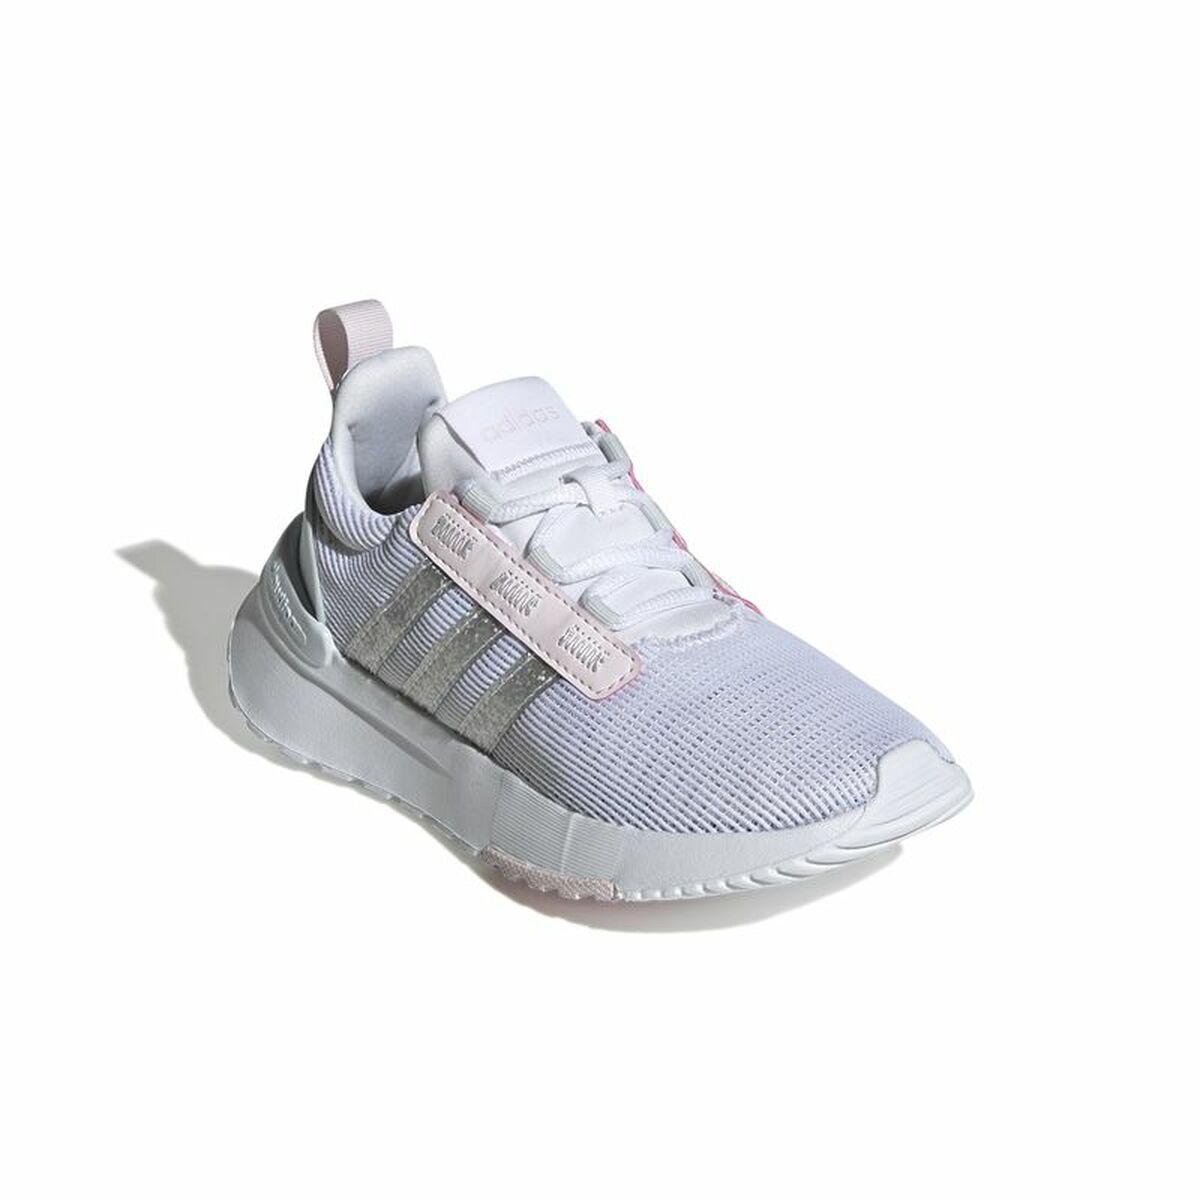 Running Shoes for Kids Adidas Racer TR21 White